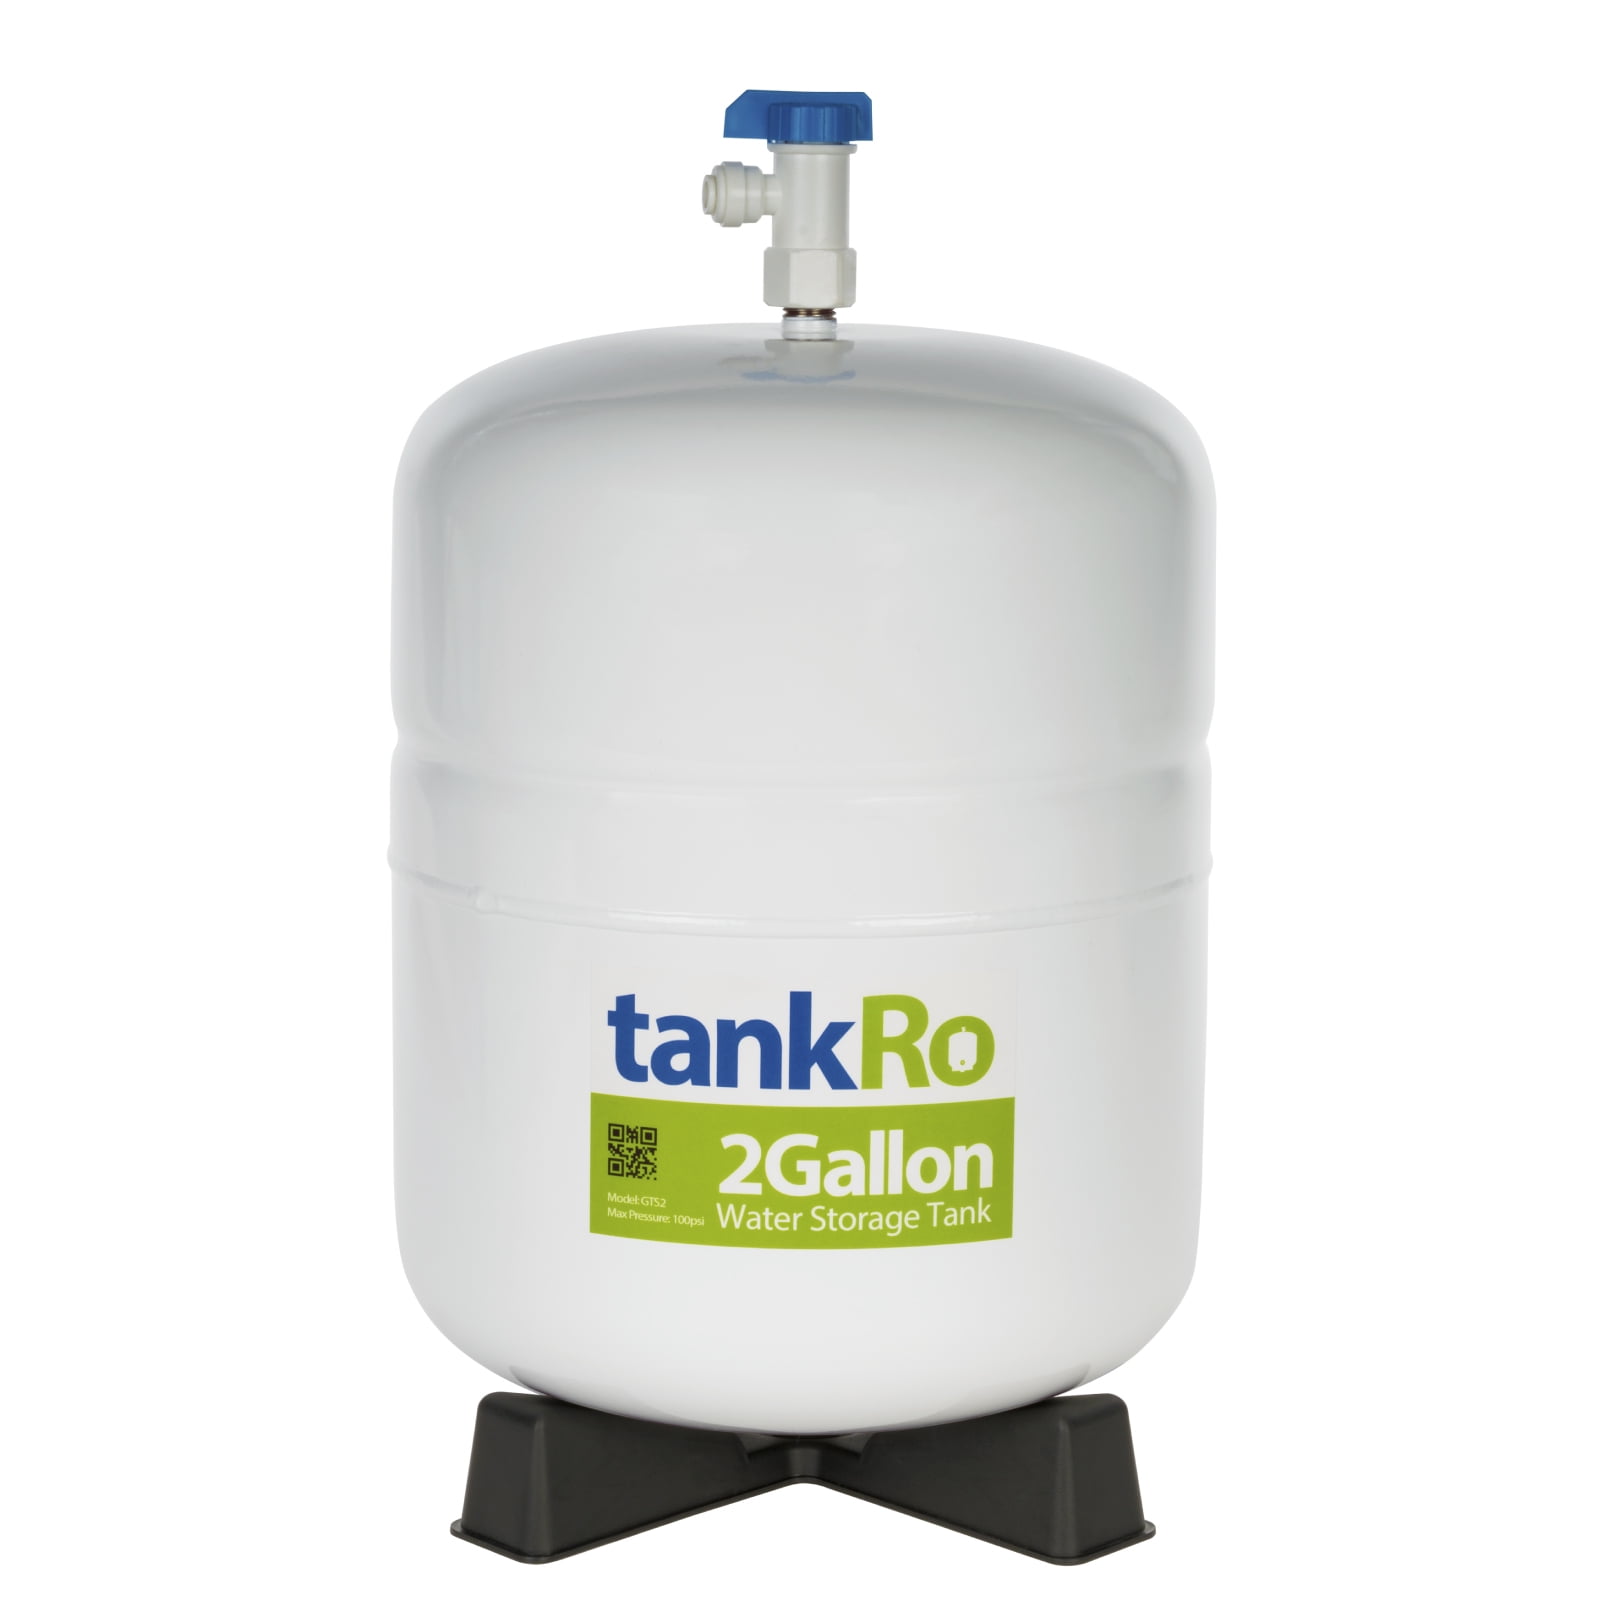 tankRO RO Water Filtration System Expansion Tank 2 Gallon Capacity Water Tank Compact